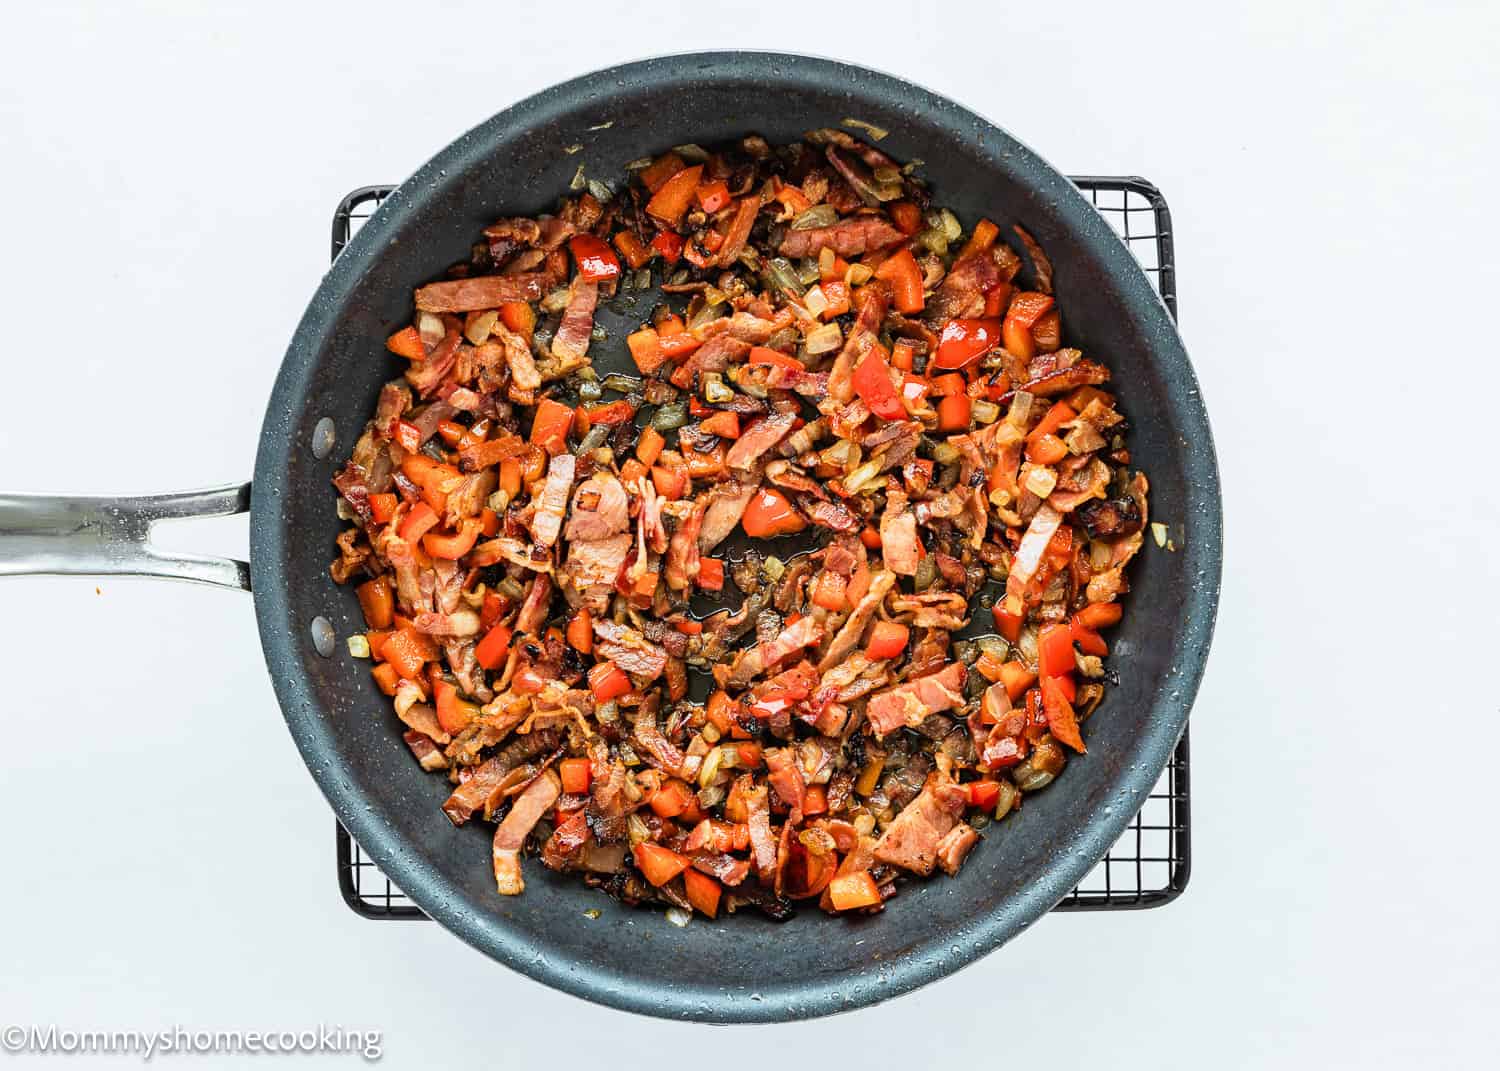 Sauté bacon and veggies to make Breakfast Casserole Without Eggs in a skillet.